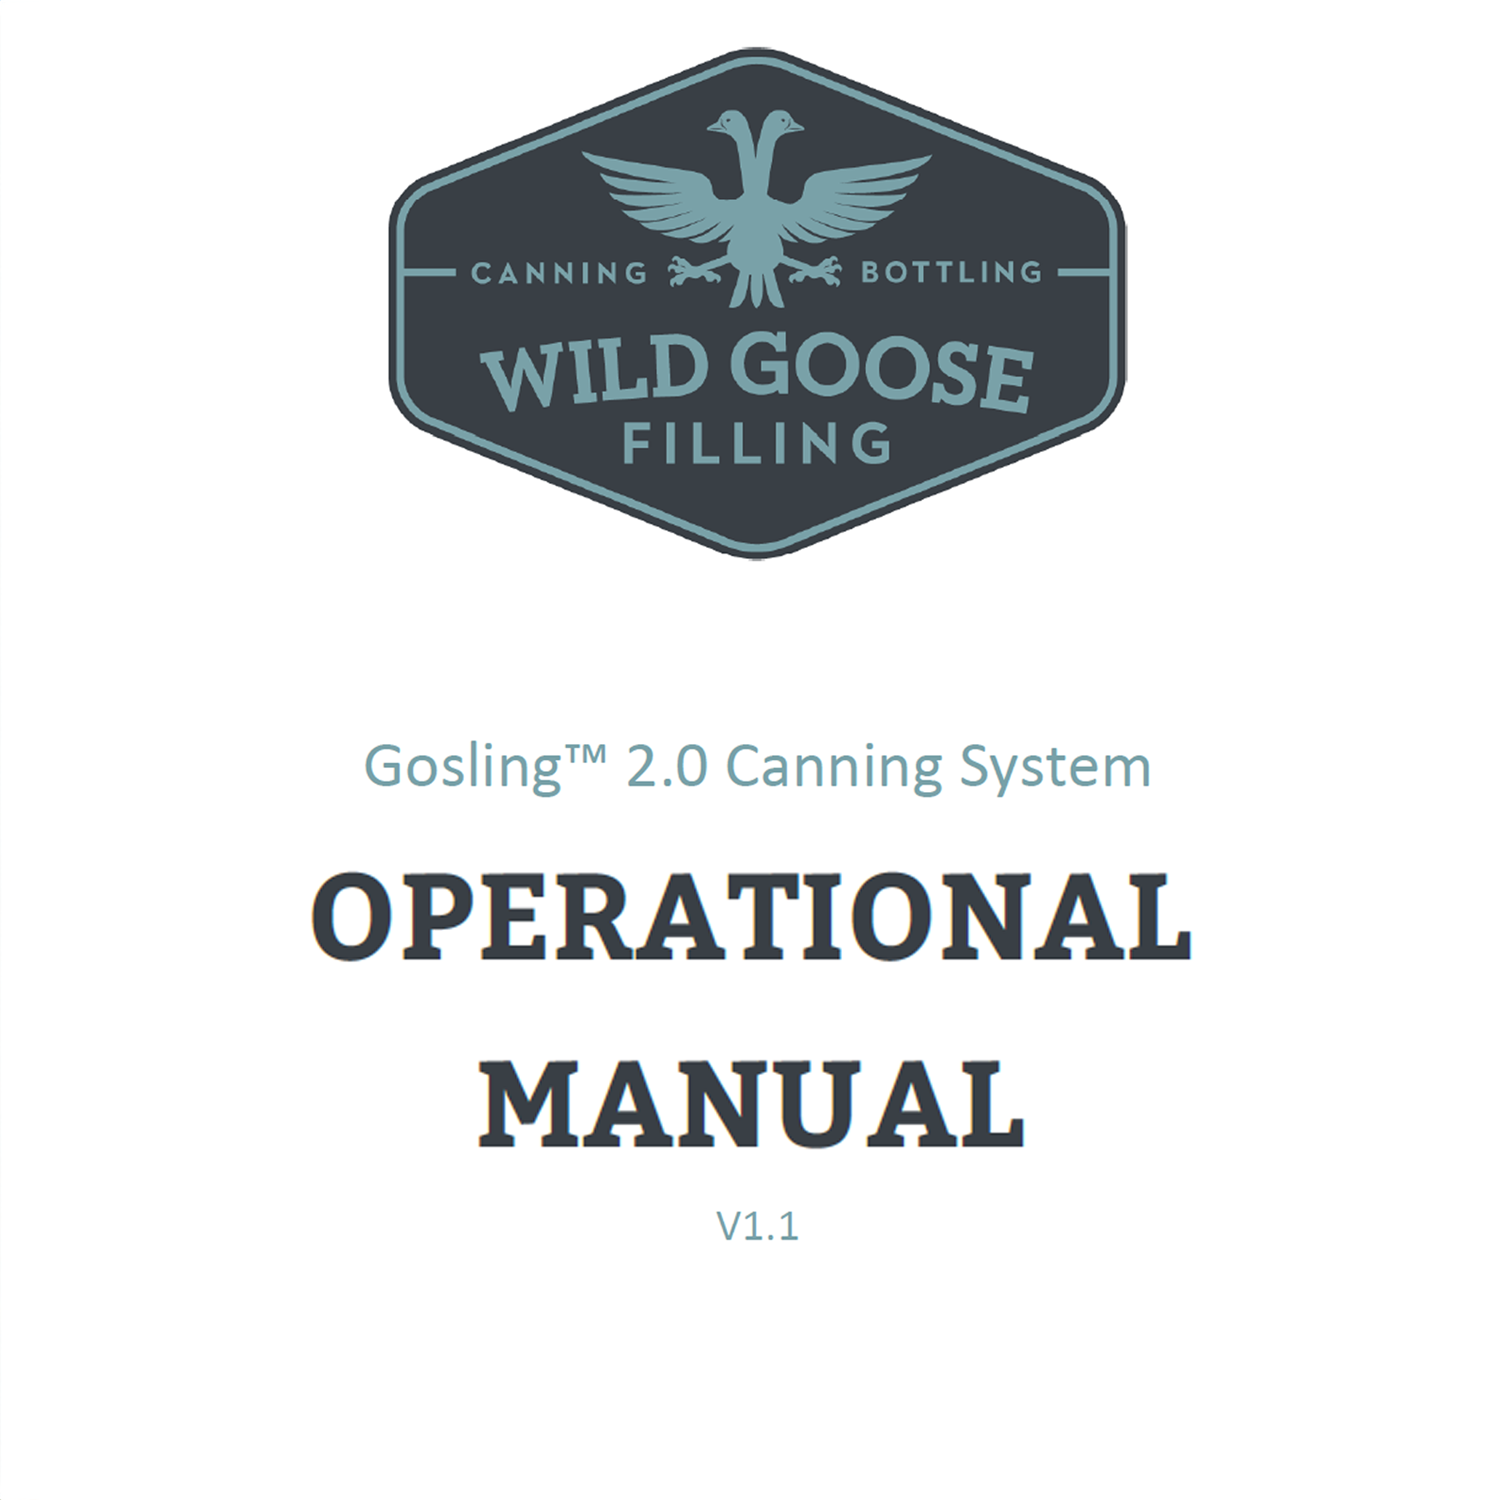 Gosling 2.0 Canning System Operational Manual